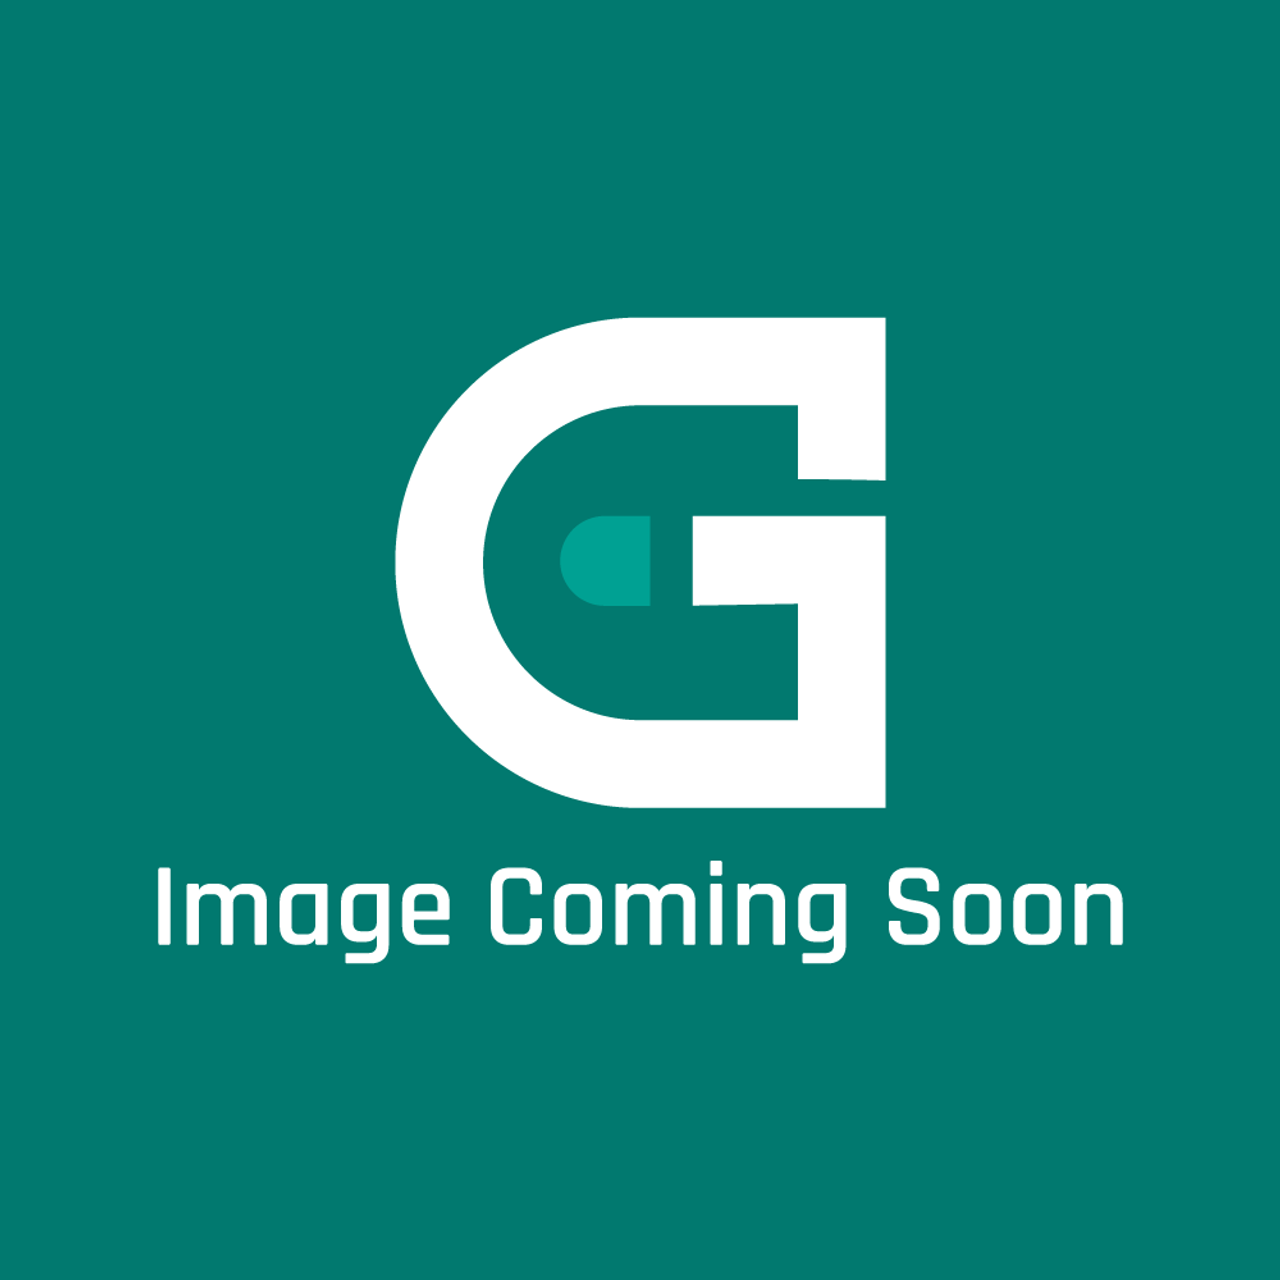 GE Appliances WJ65X24281 - Insulation Plate - Image Coming Soon!